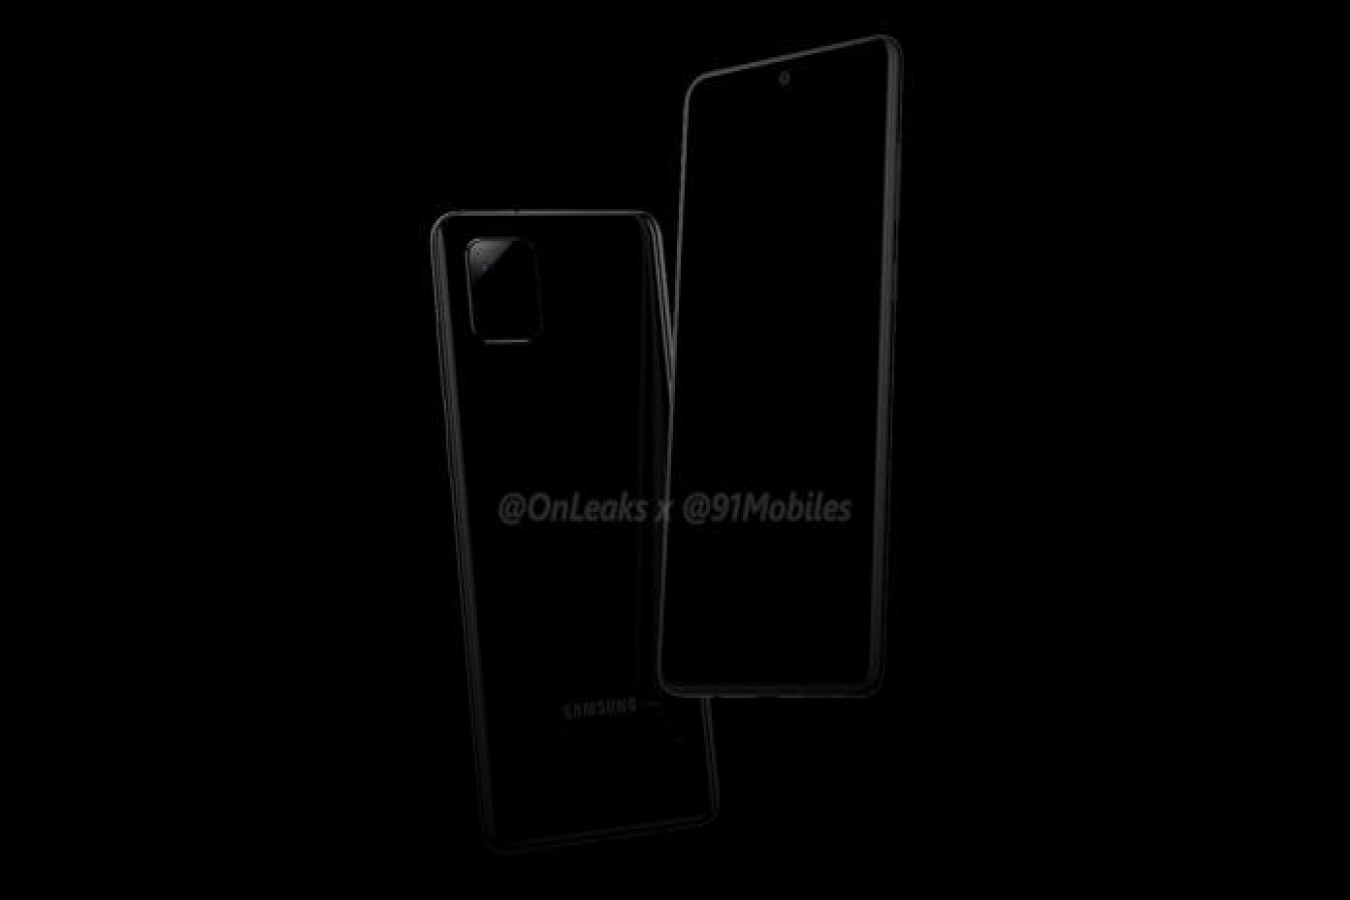 Samsung Galaxy Note 10 Lite full specifications leak